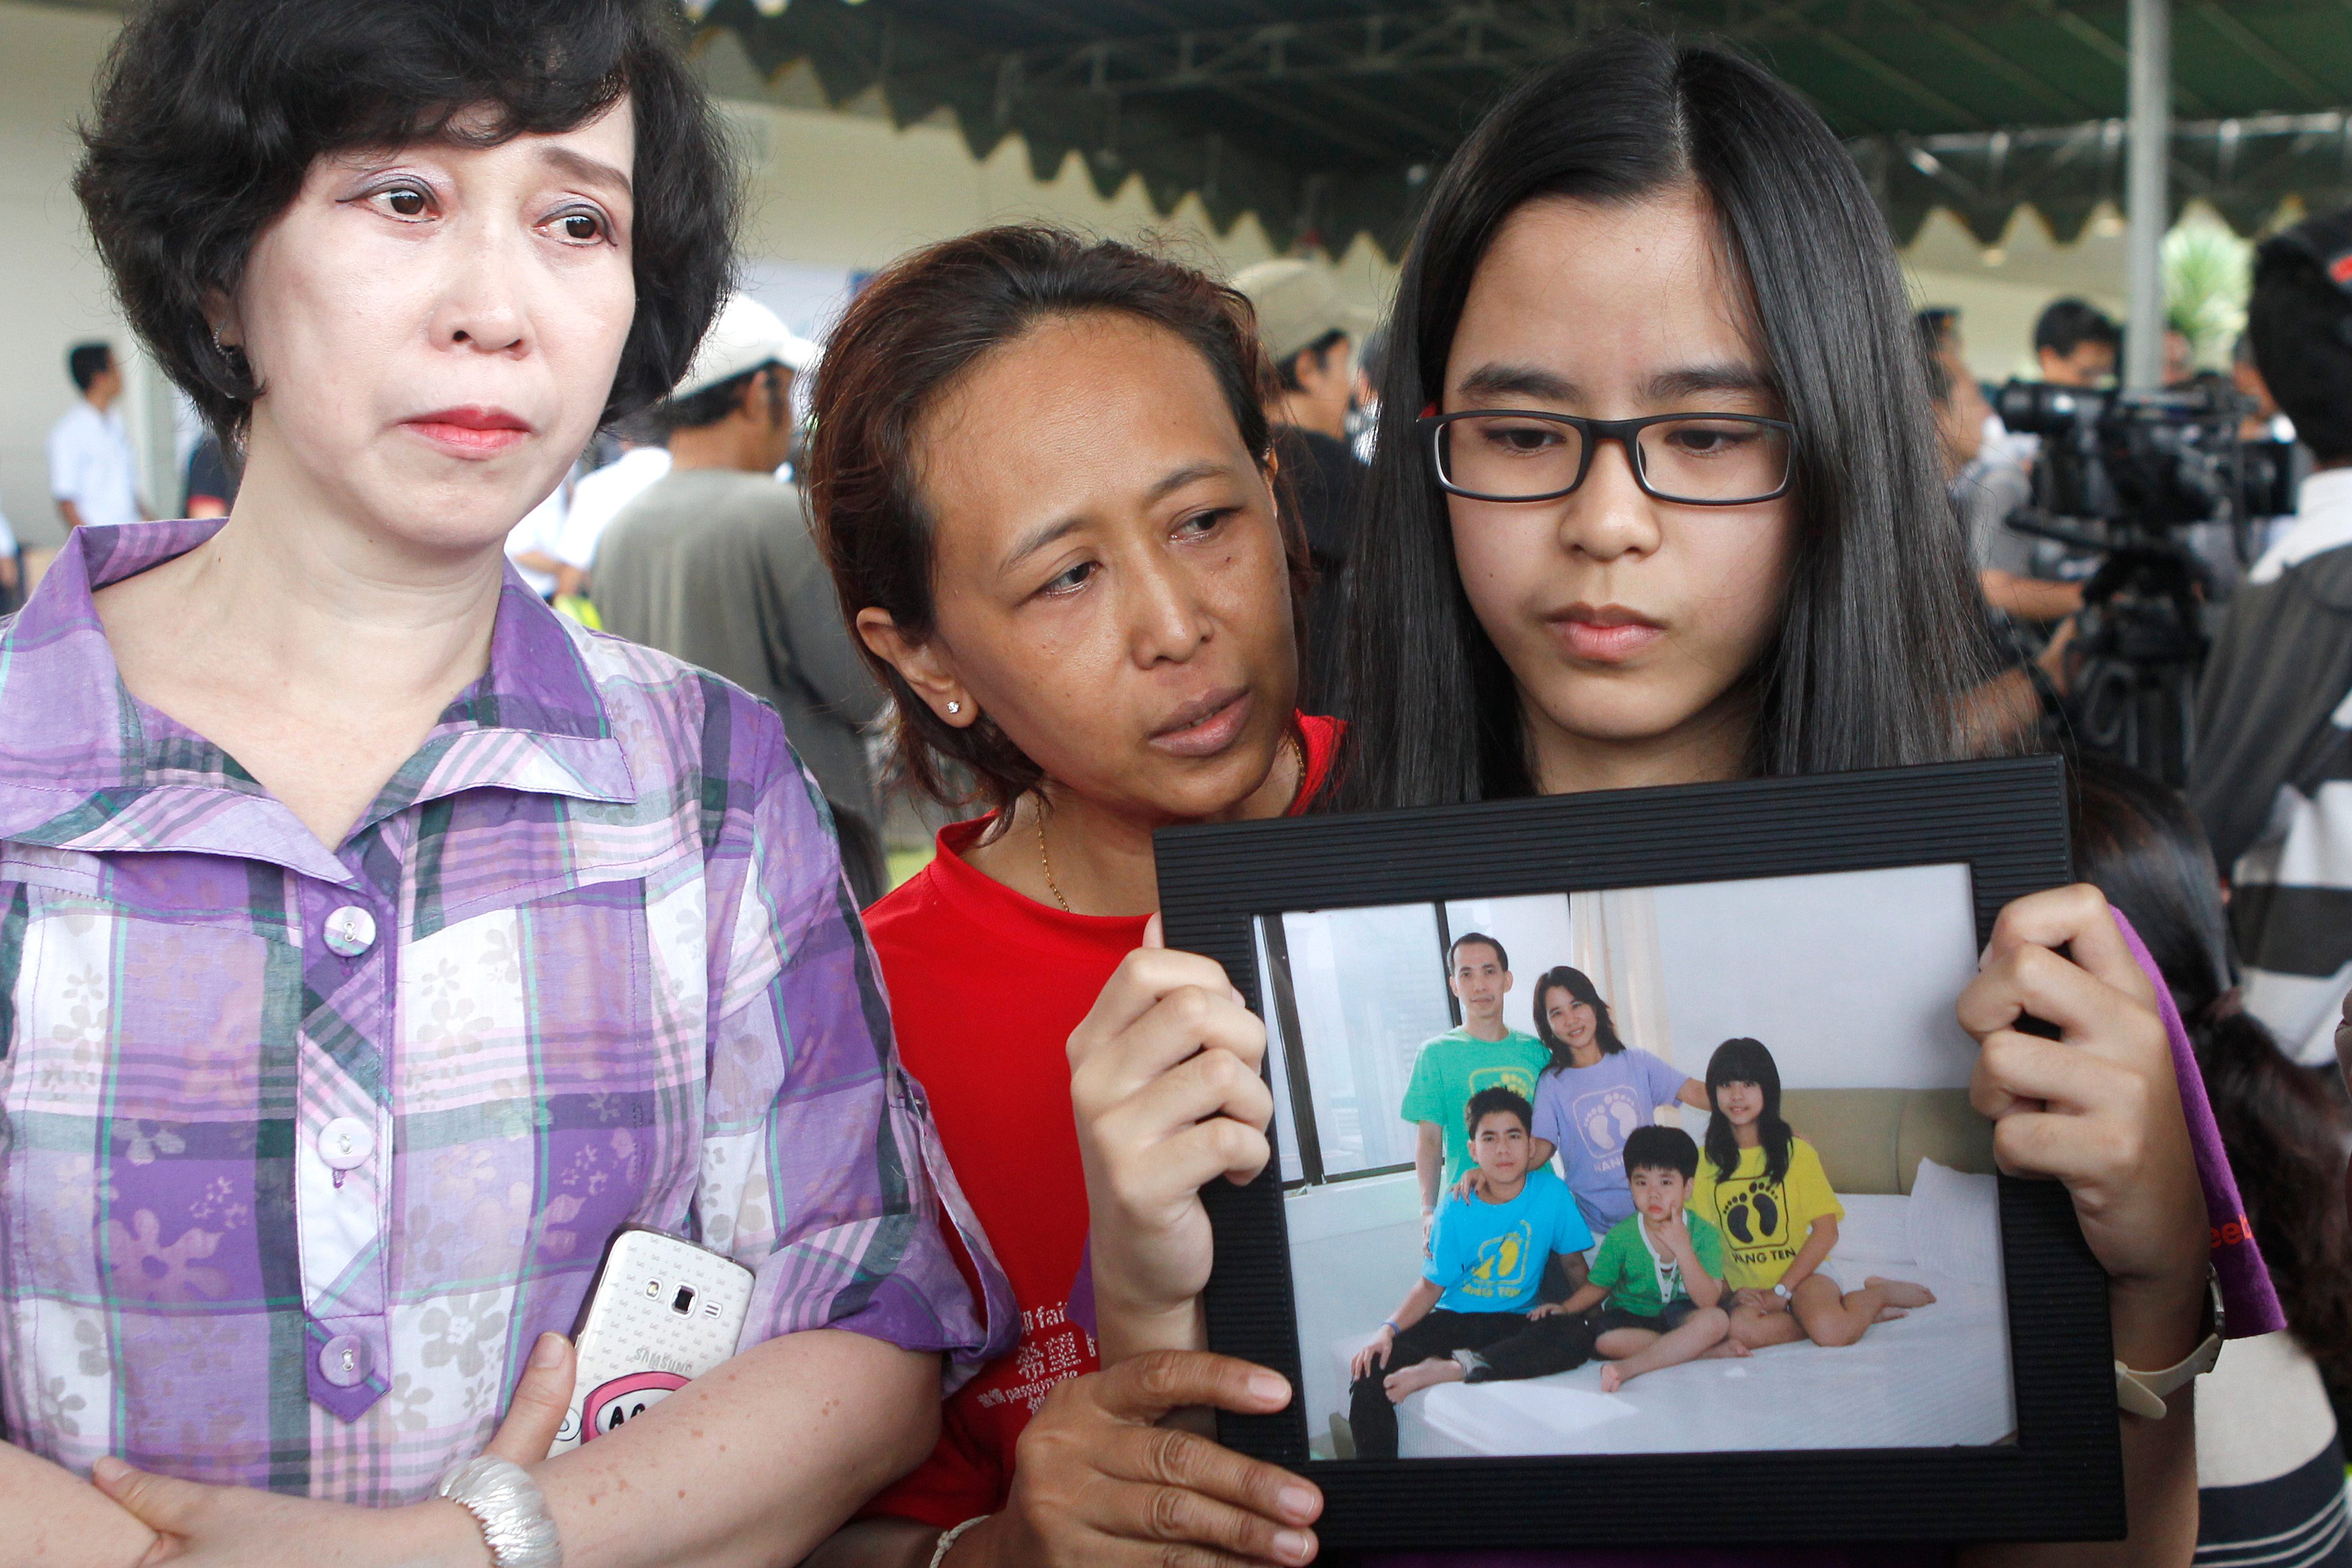 Relatives hold a picture of the Herumanto Tanus family as they wait for news at Juanda Airport on December 29, 2014.  Photo from EPA